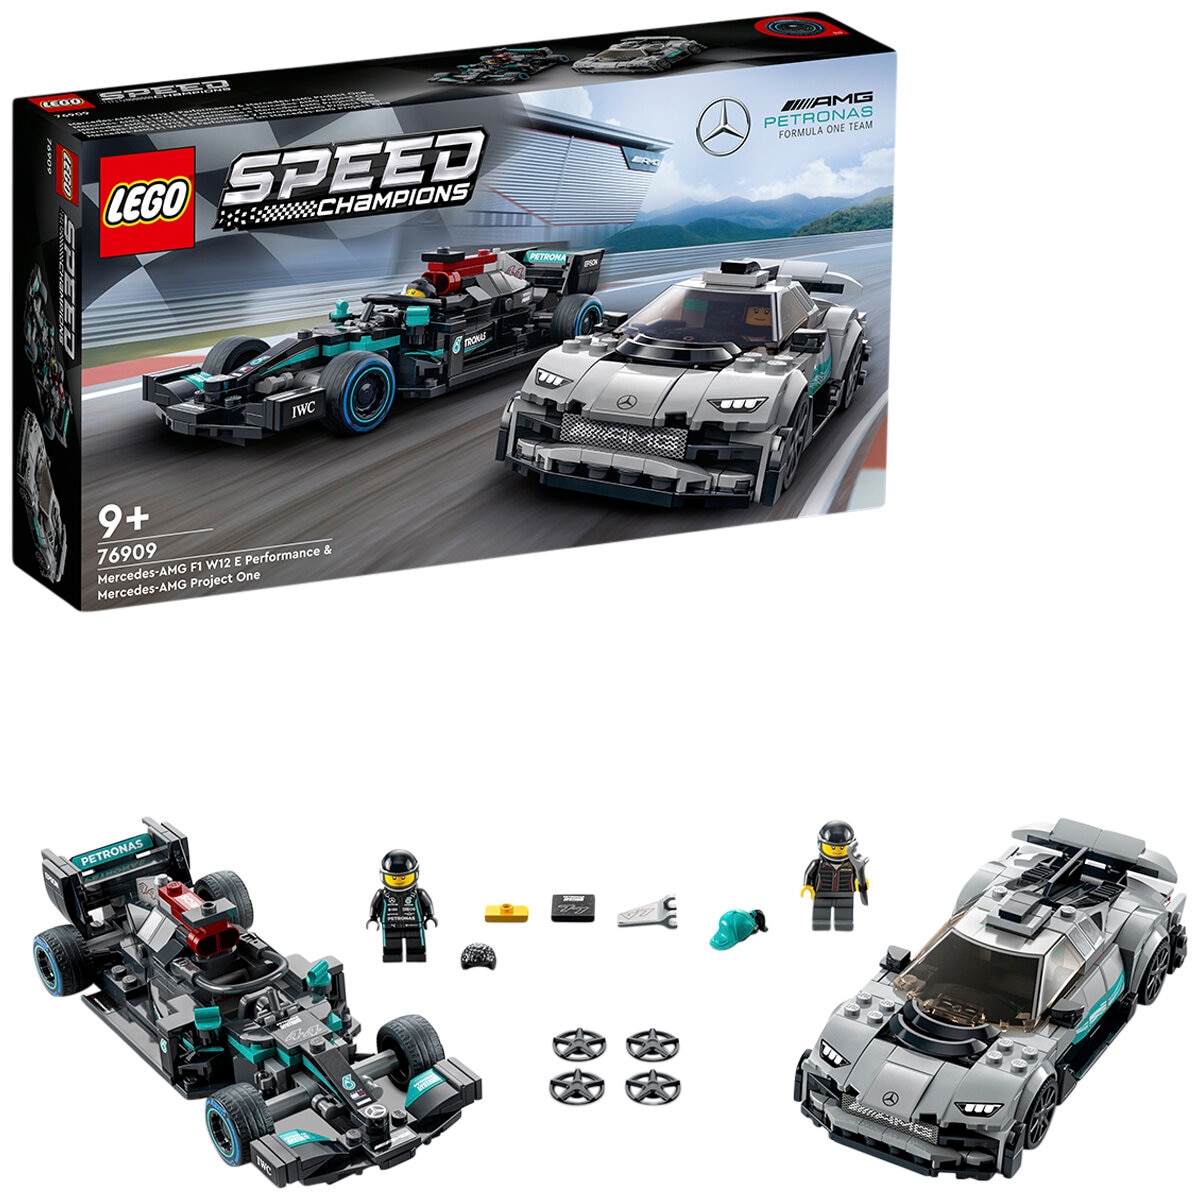 LEGO Speed Champions Mercedes-AMG F1 W12 E Performance & Mercedes-AMG Project One 76923